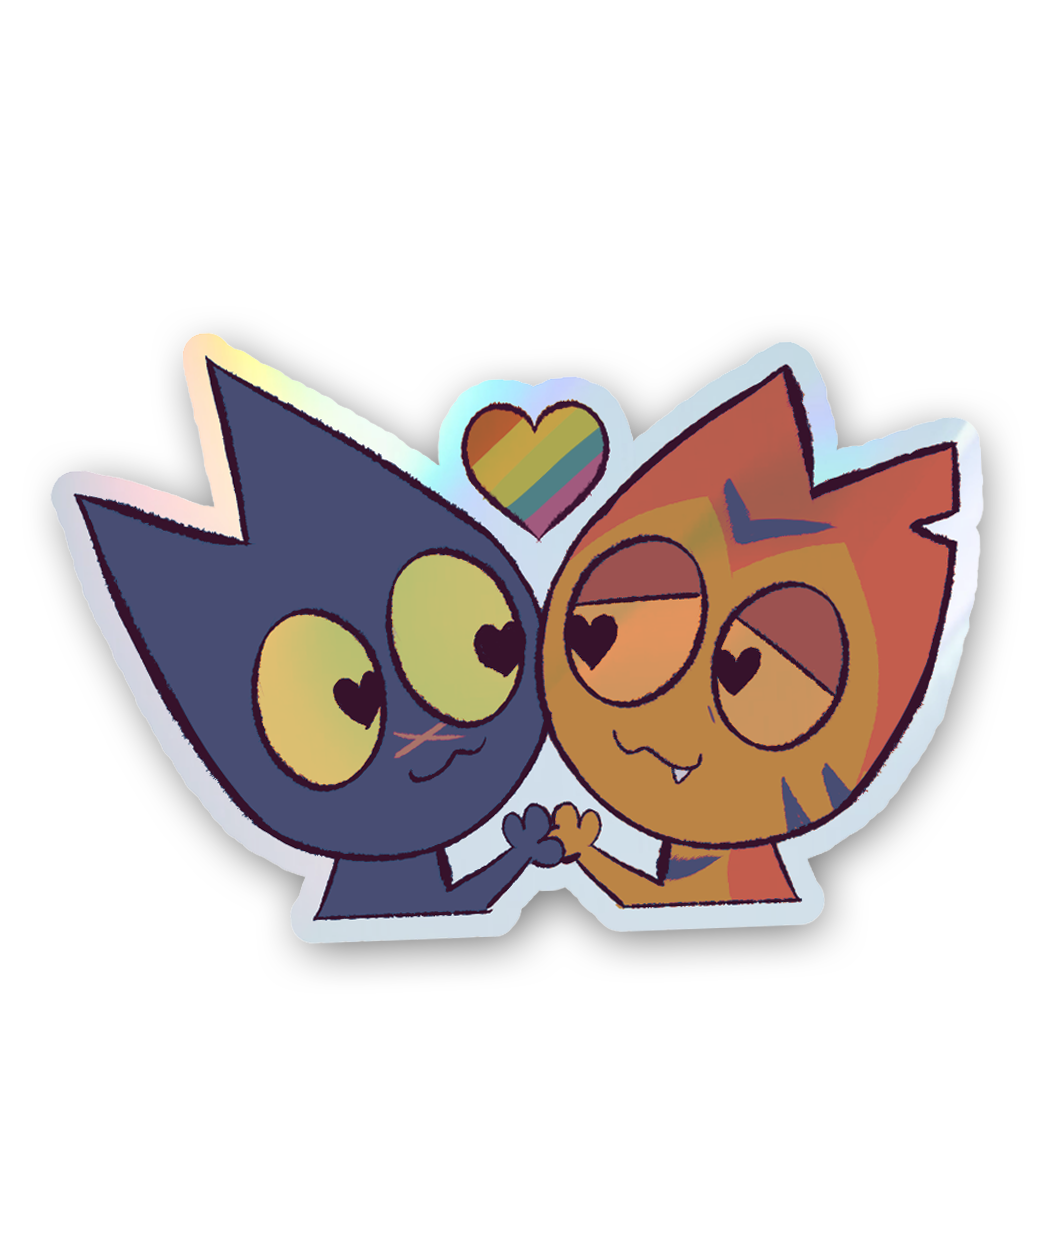 Shiny, holographic sticker from Mars Heyward of two illustrated cats, one blue, one orange, holding hands and looking at each other with a small rainbow heart above their heads. 